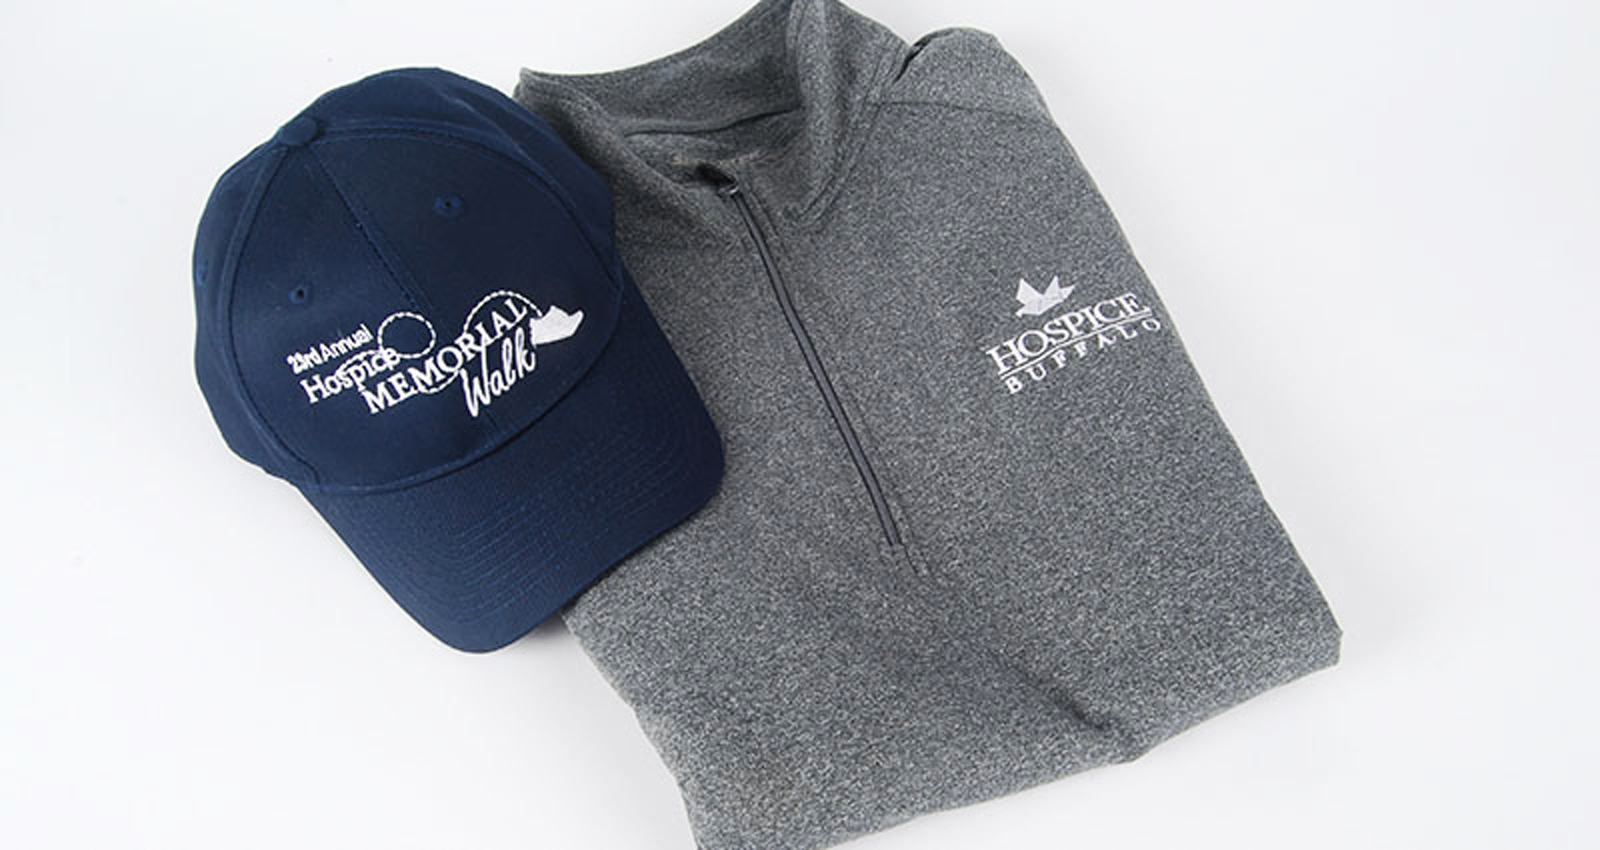 Hospice Buffalo hat and sweater corporate merch